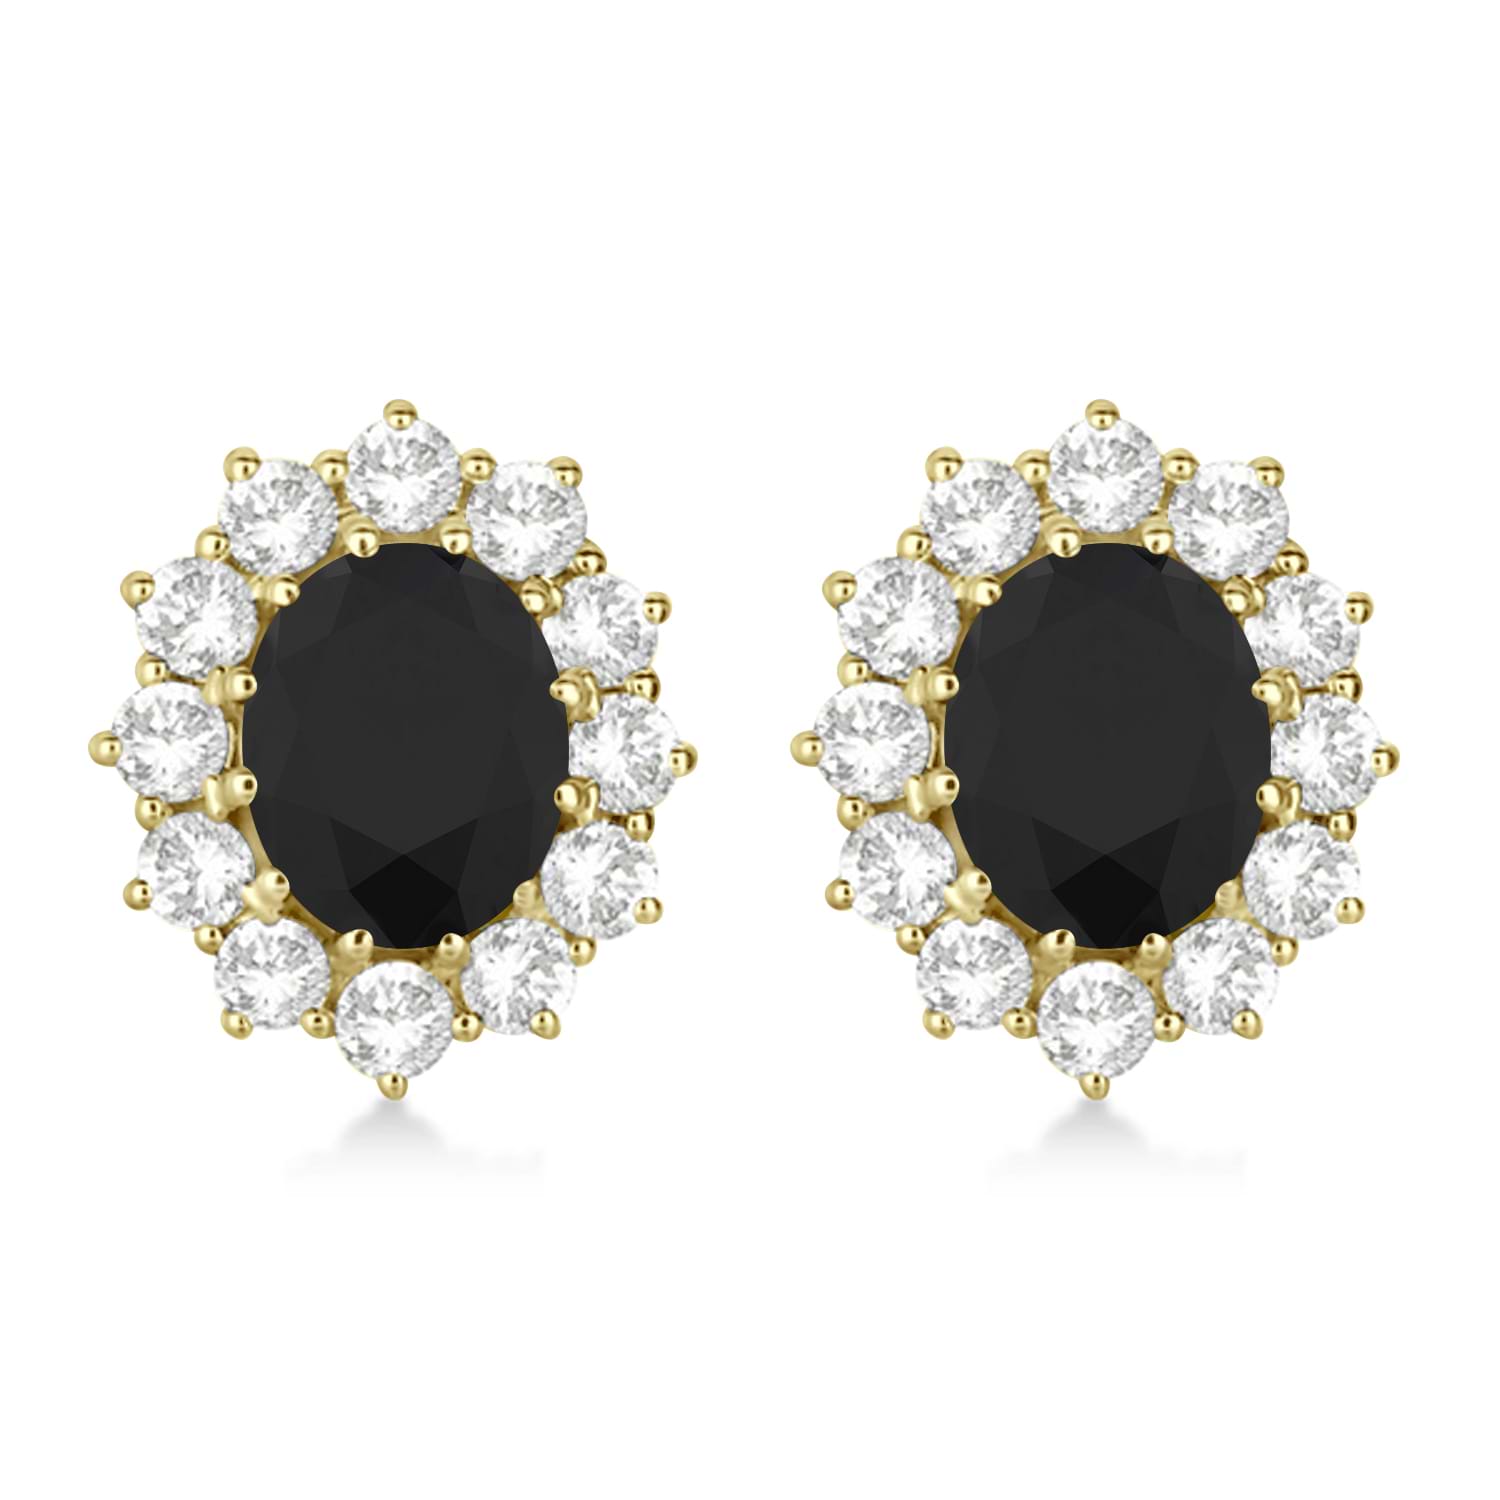 Oval Black and White Diamond Earrings 14k Yellow Gold (5.55ctw)